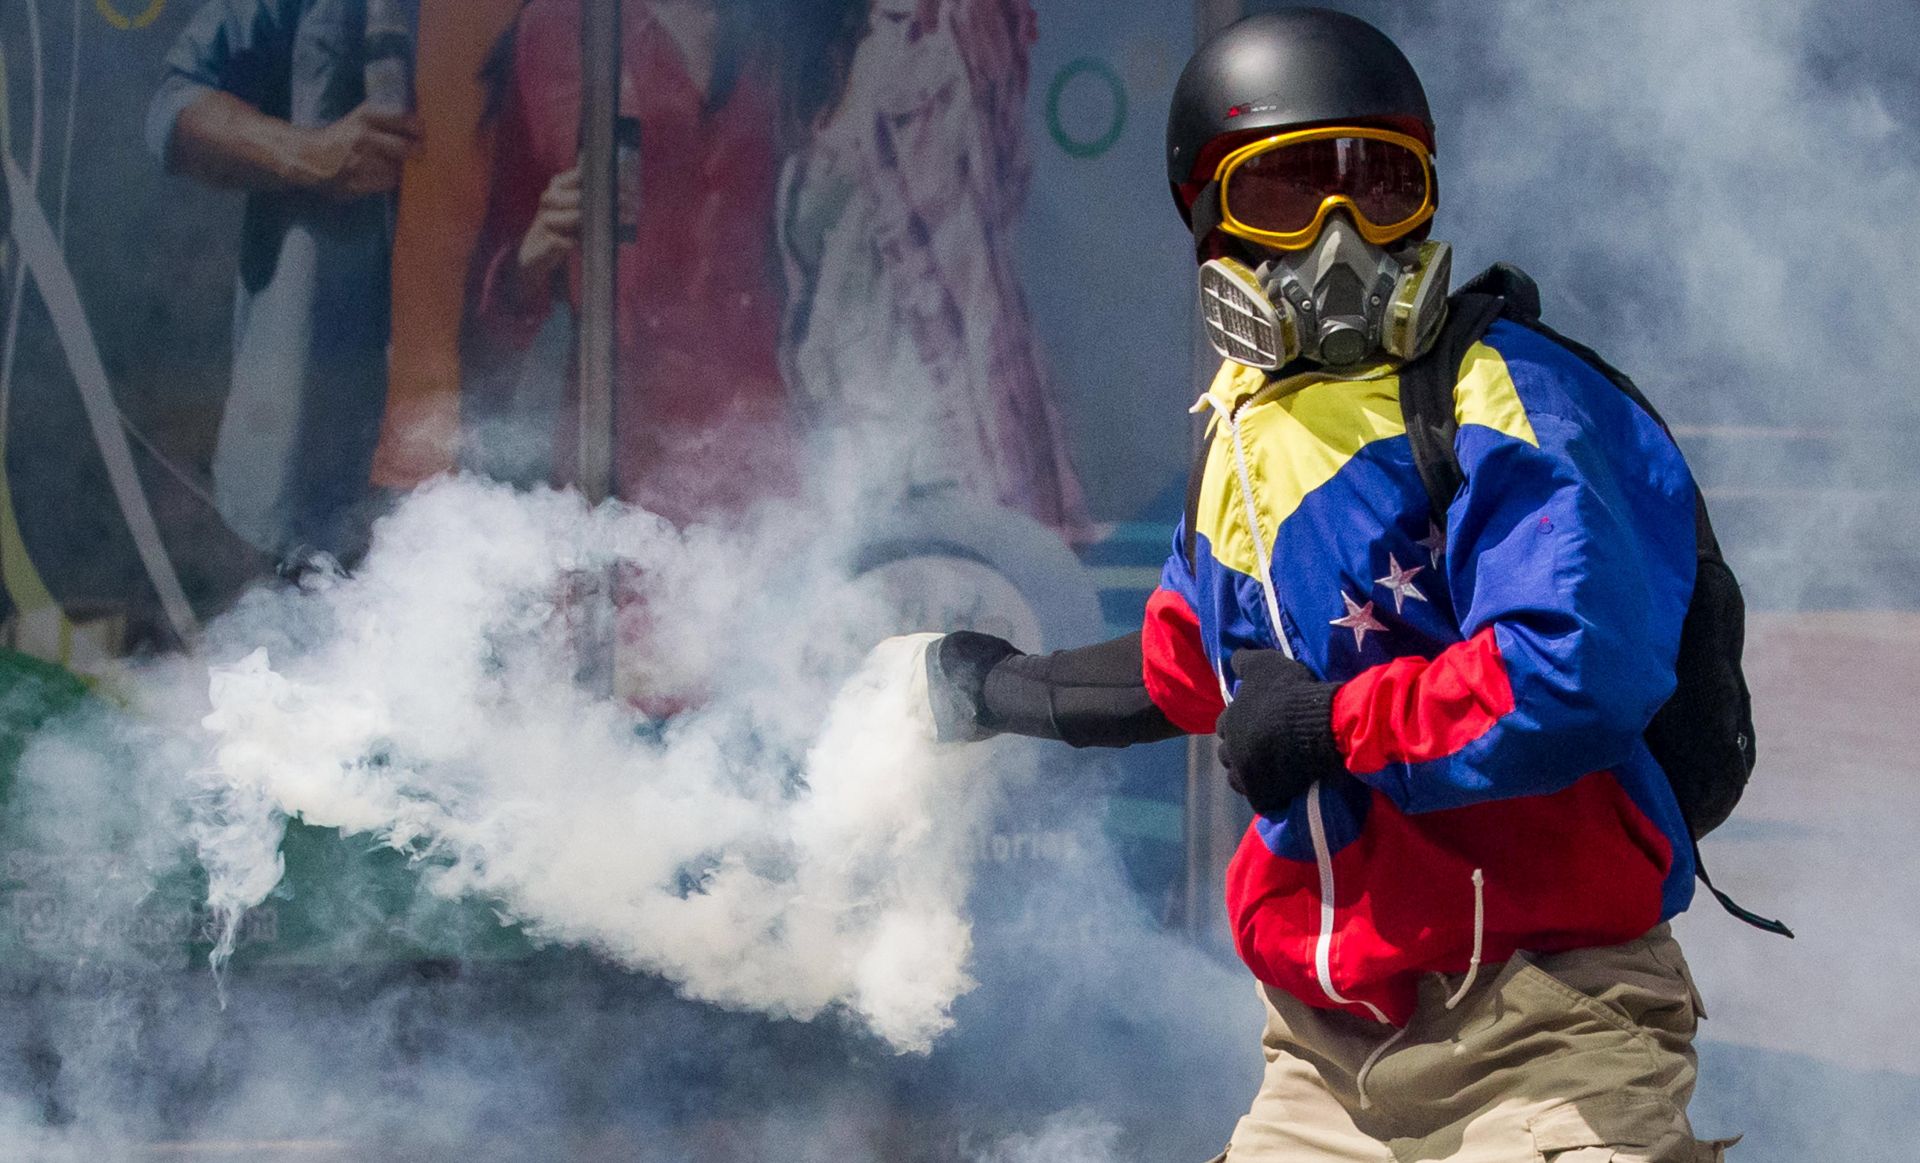 epa06000298 Protesters clash with police during an opposition protest in Caracas, Venezuela, 30 May 2017. University students and opponents of the government of President Nicolas Maduro return to the streets to demand the end of the 'repression' and 'impunity' of the Maduro government. More than 50 people have been killed and scores injured in protest-related violence over the last sixty days.  EPA/MIGUEL GUTIERREZ